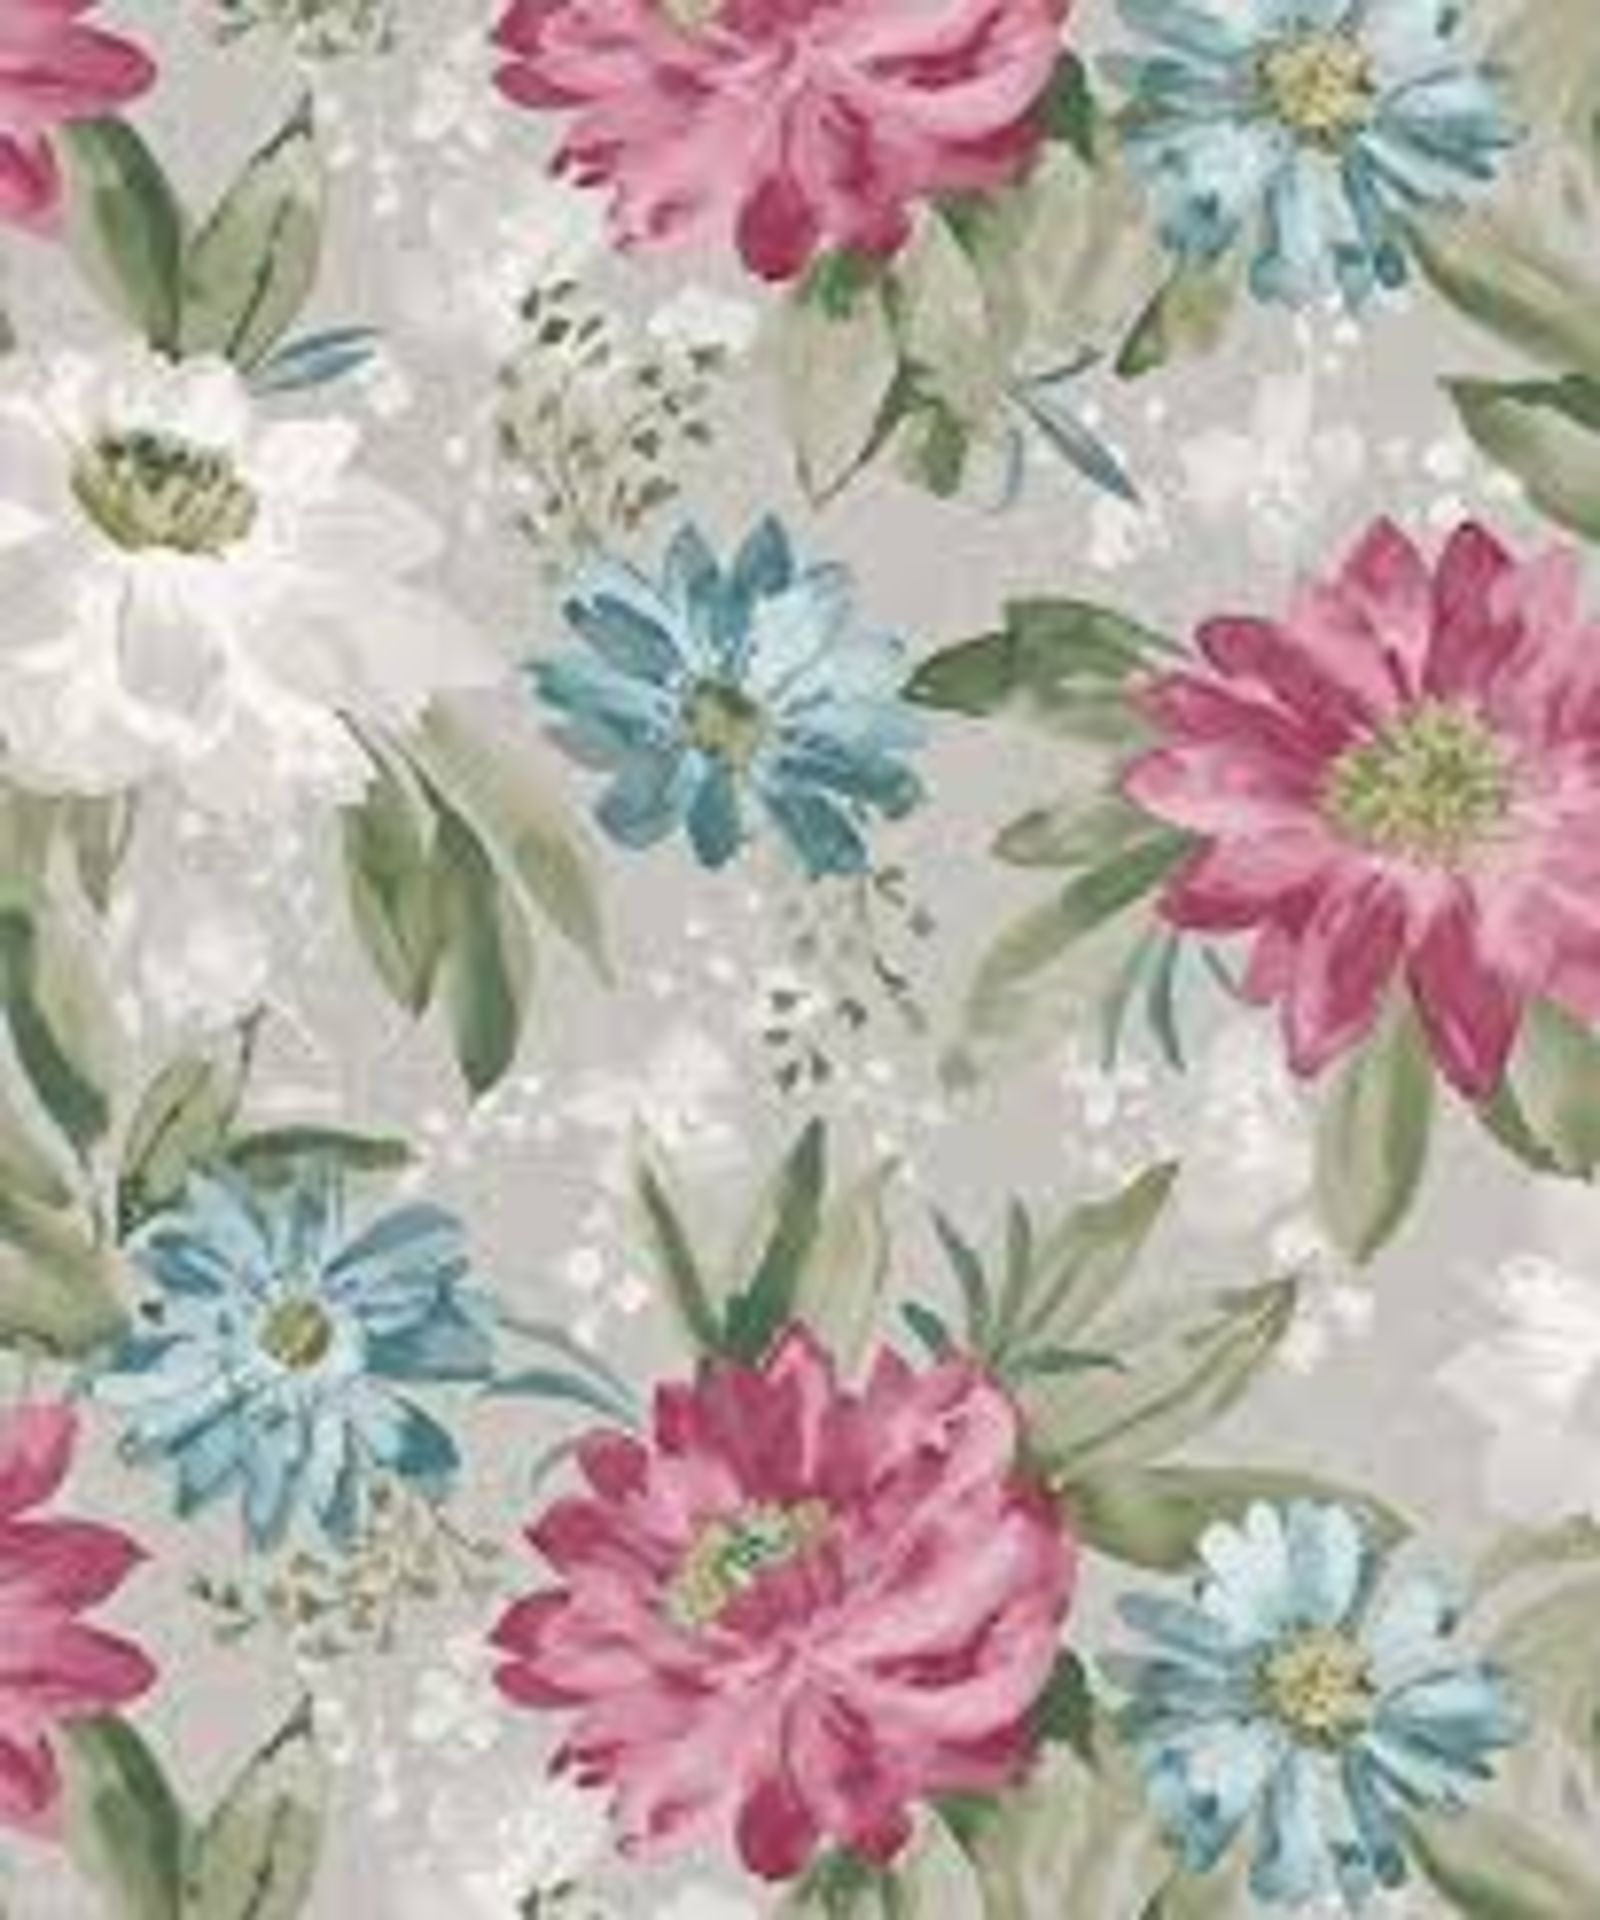 Brand New & Sealed Art Floral Print Wall Paper RRP